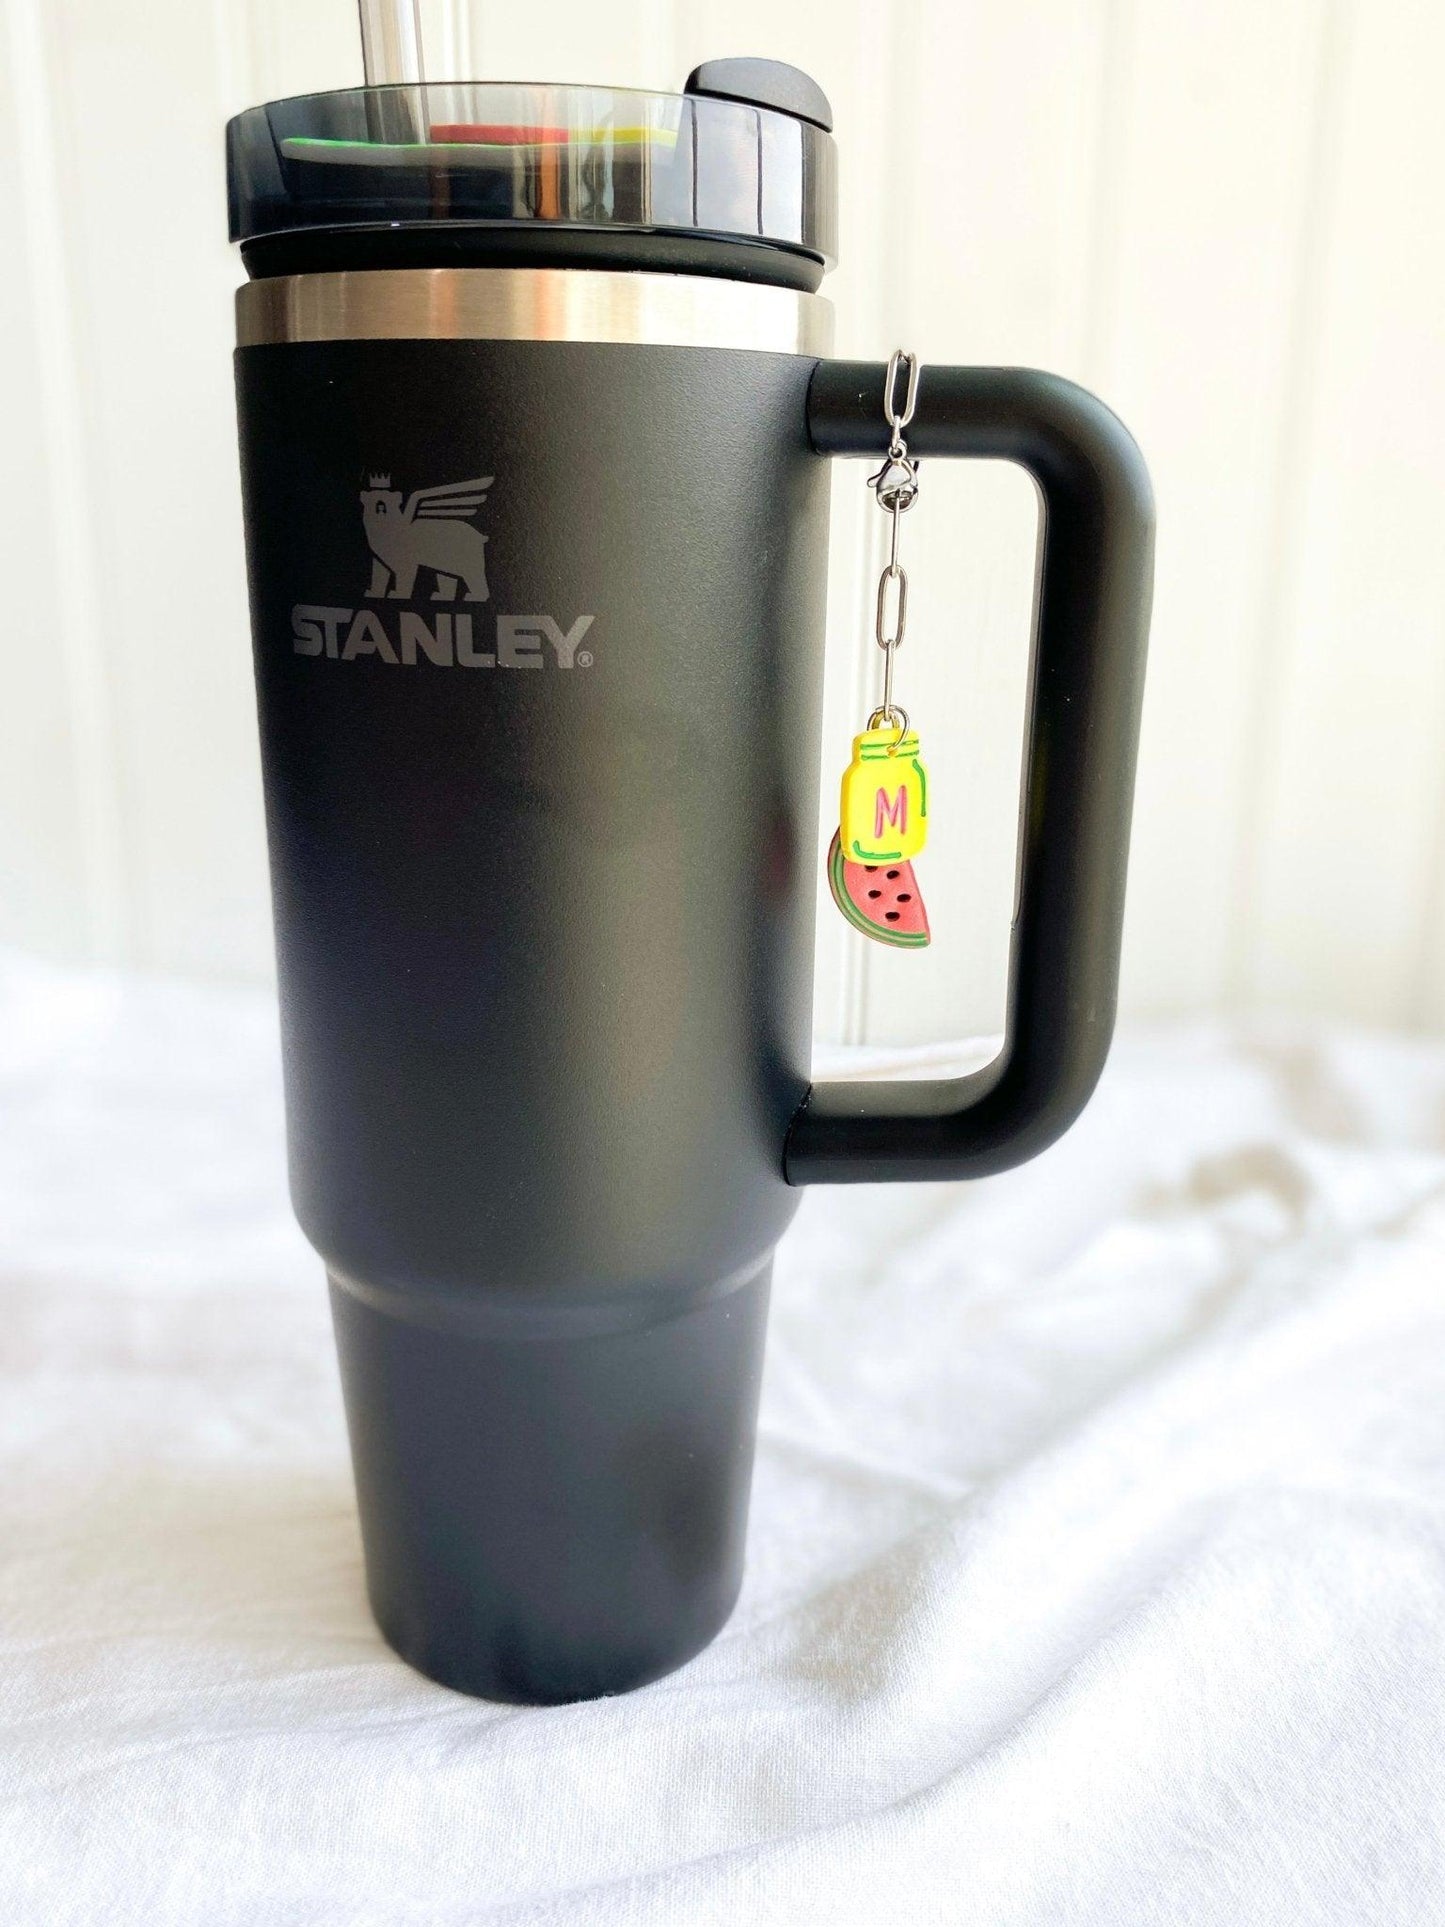 Drinkin' watermelon moonshine 🍉🫙✨ it's the Stanley + charm combo for